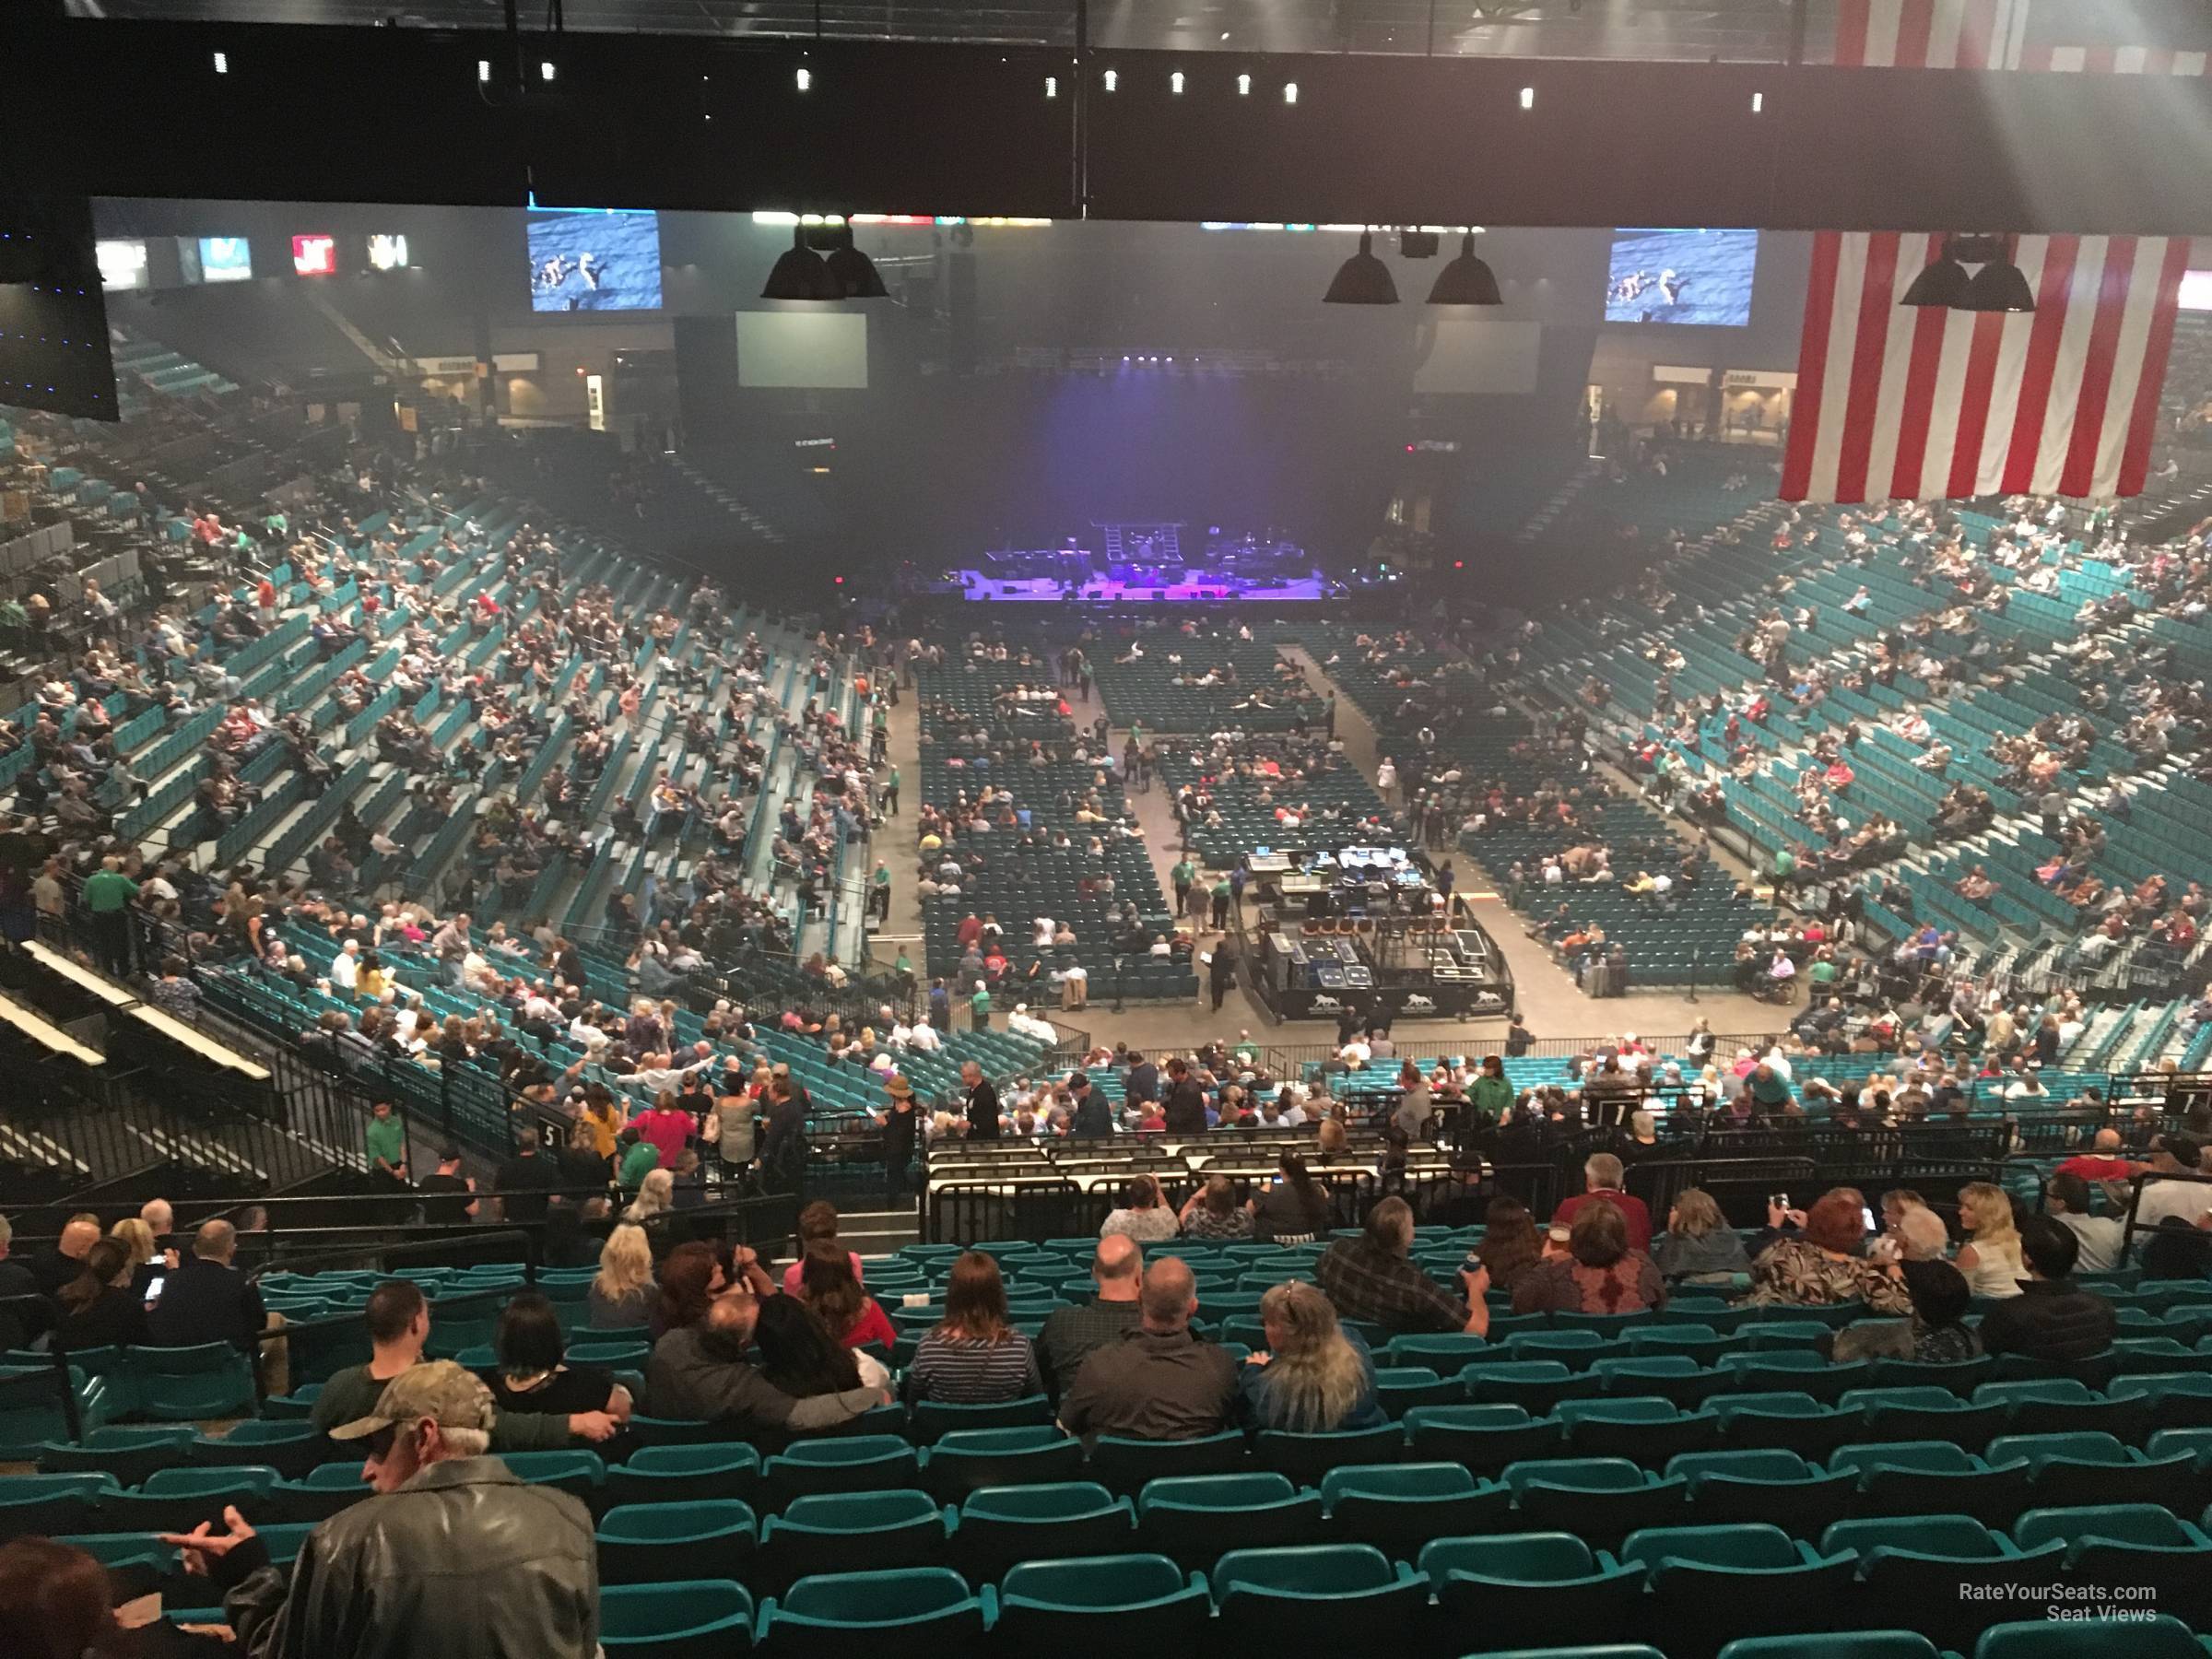 MGM Grand Garden Arena Section 203 - RateYourSeats.com